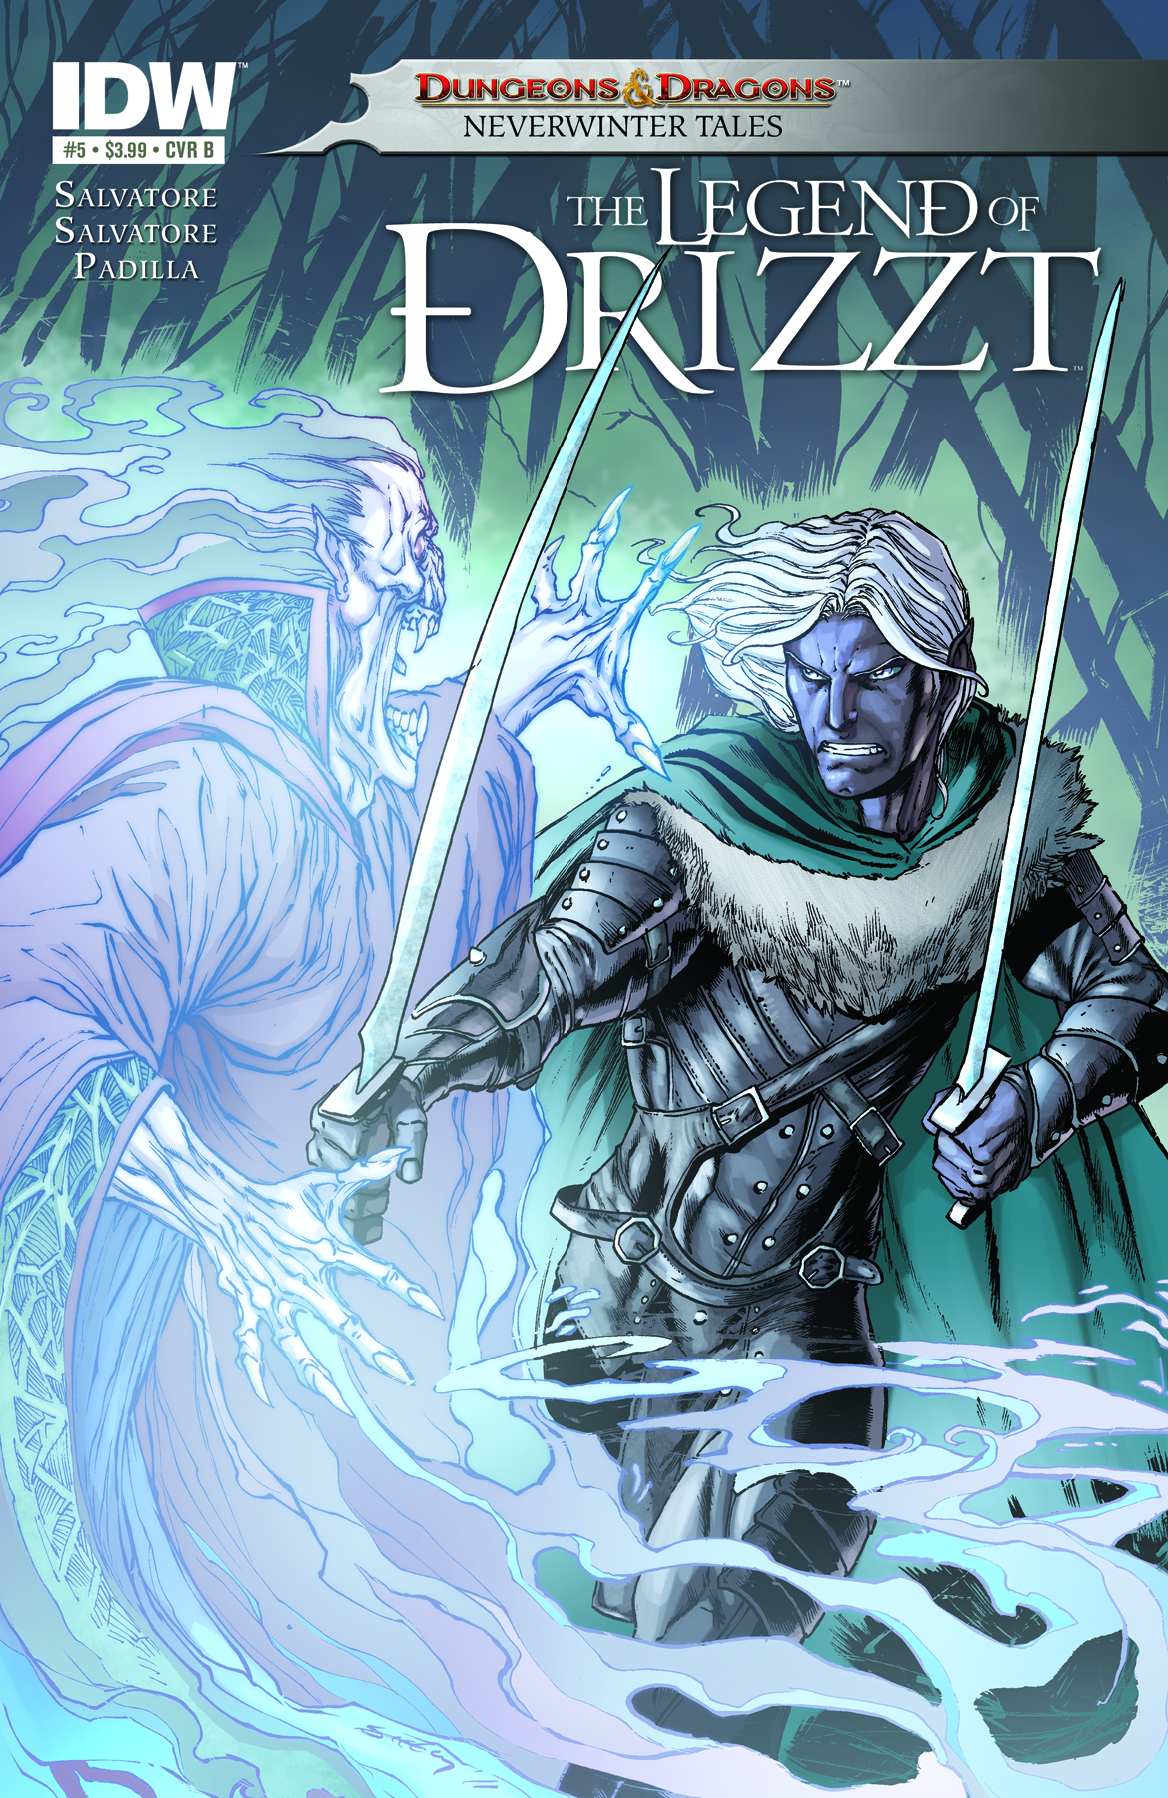 DUNGEONS & DRAGONS DRIZZT #5 (OF 5)